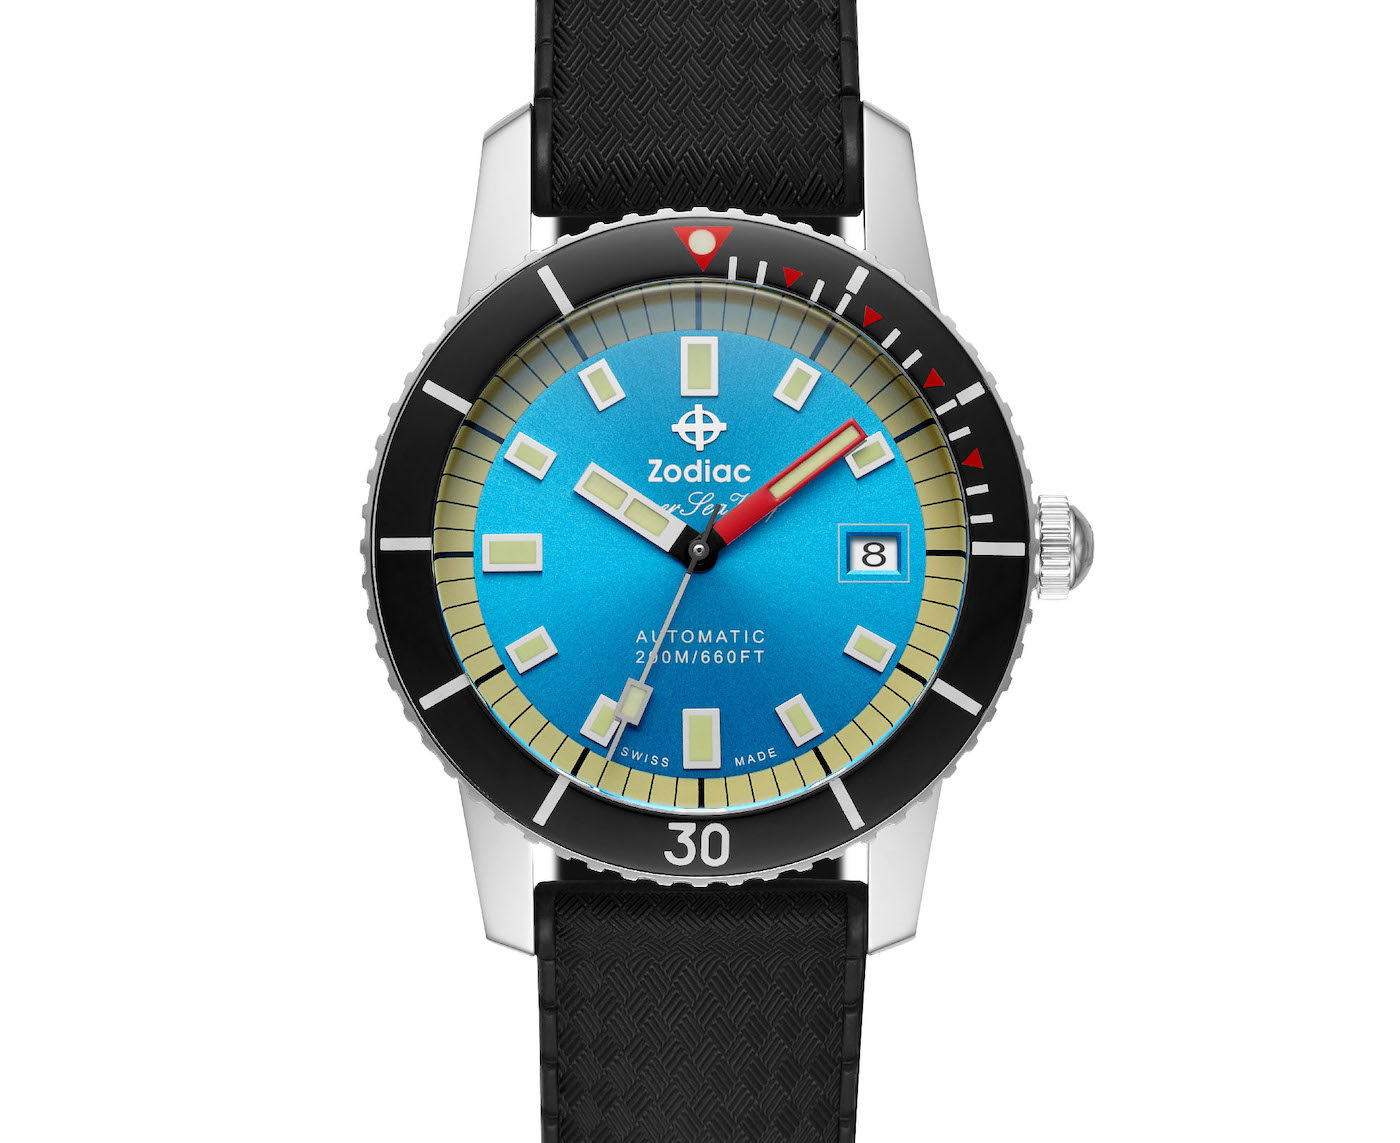 Zodiac Super Sea Wolf Limited Editions Inspired By The Ocean Watch Releases 